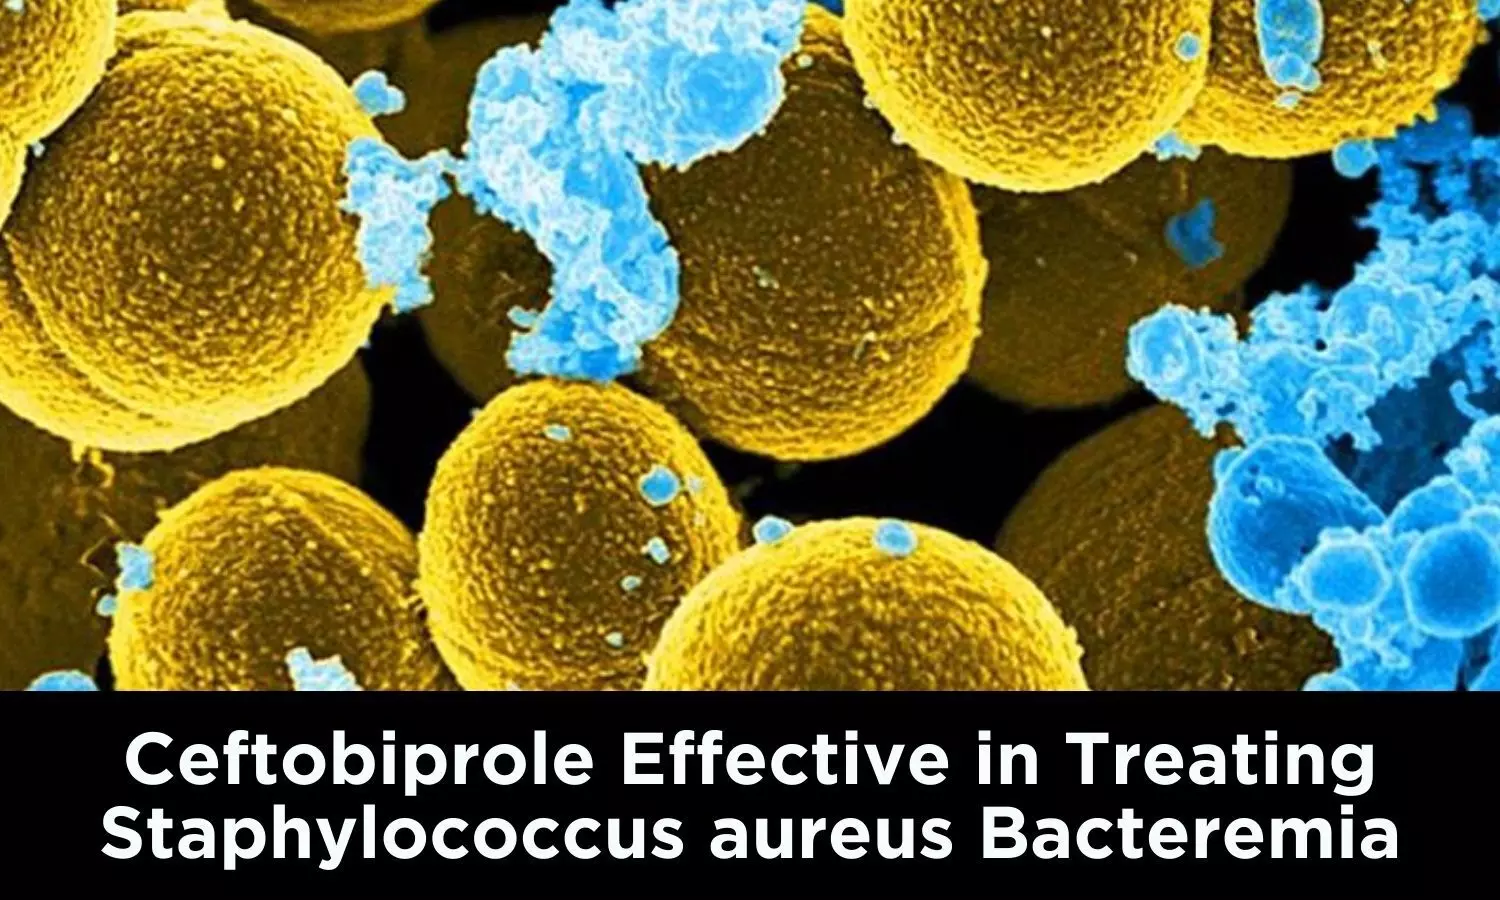 Ceftobiprole Effective in Treating Staphylococcus aureus Bacteremia